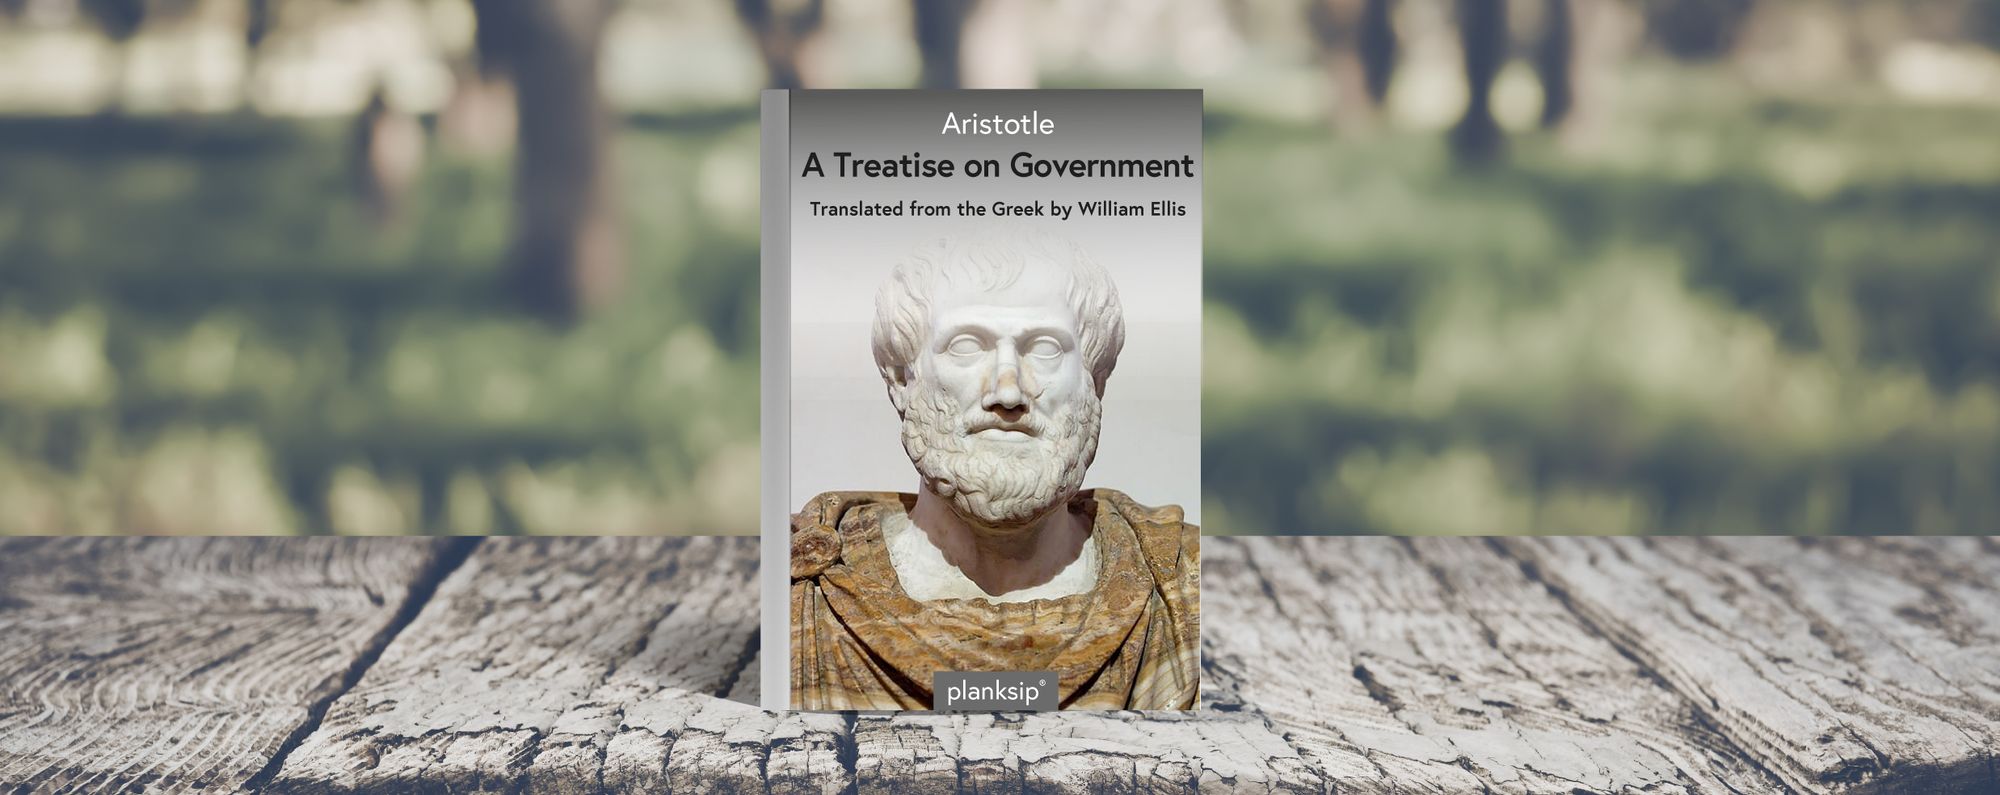 A Treatise on Government by Aristotle (384-322 B.C.). Published by planksip